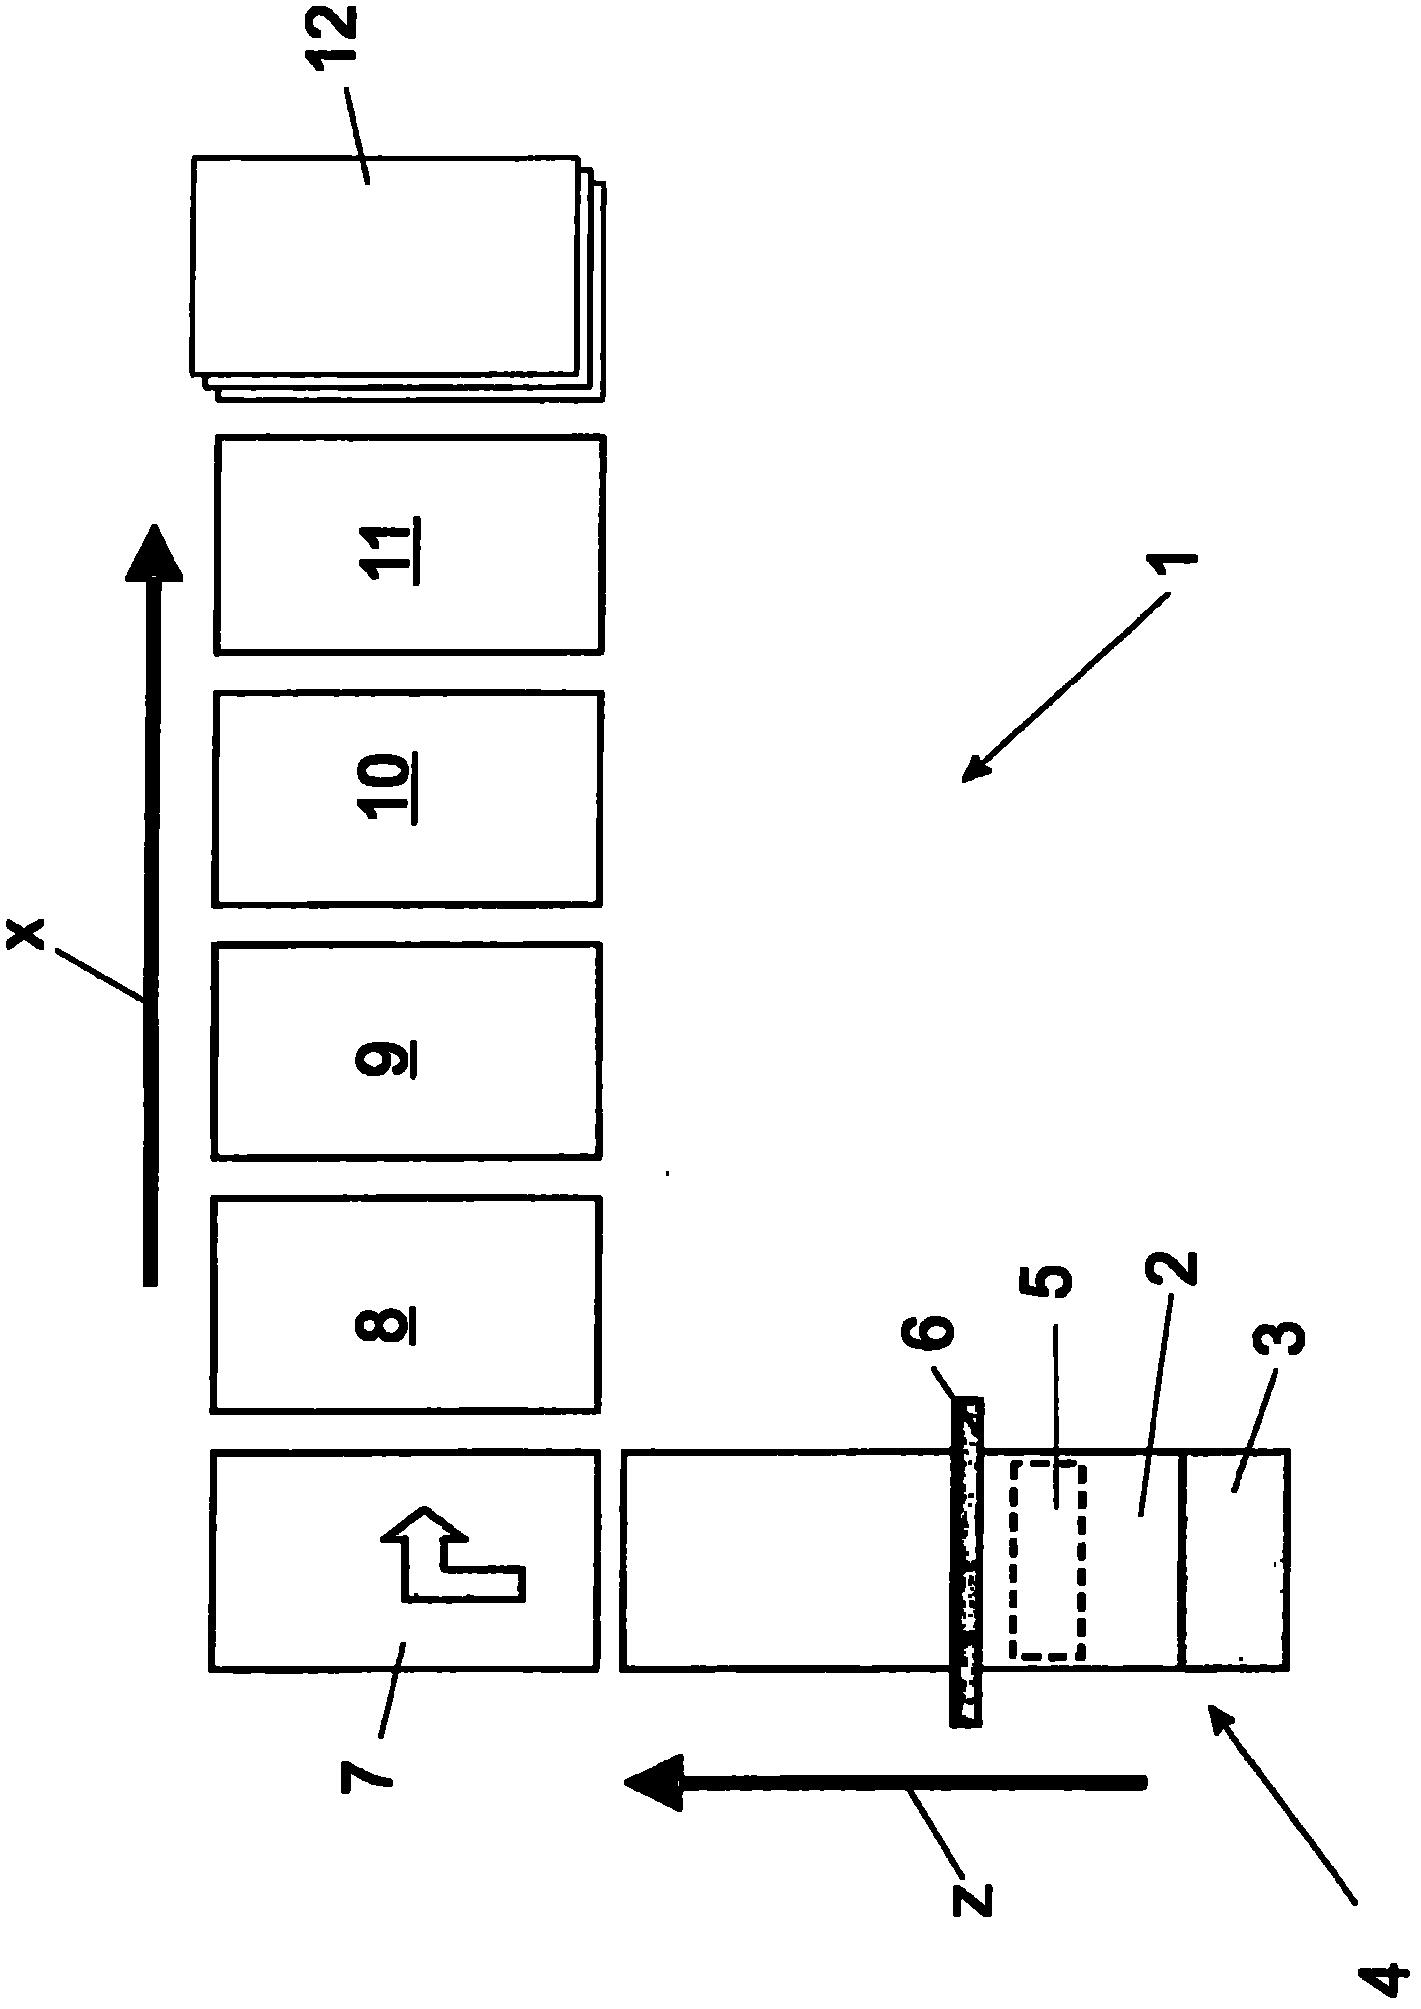 Device and method for producing bags from pieces of tubing